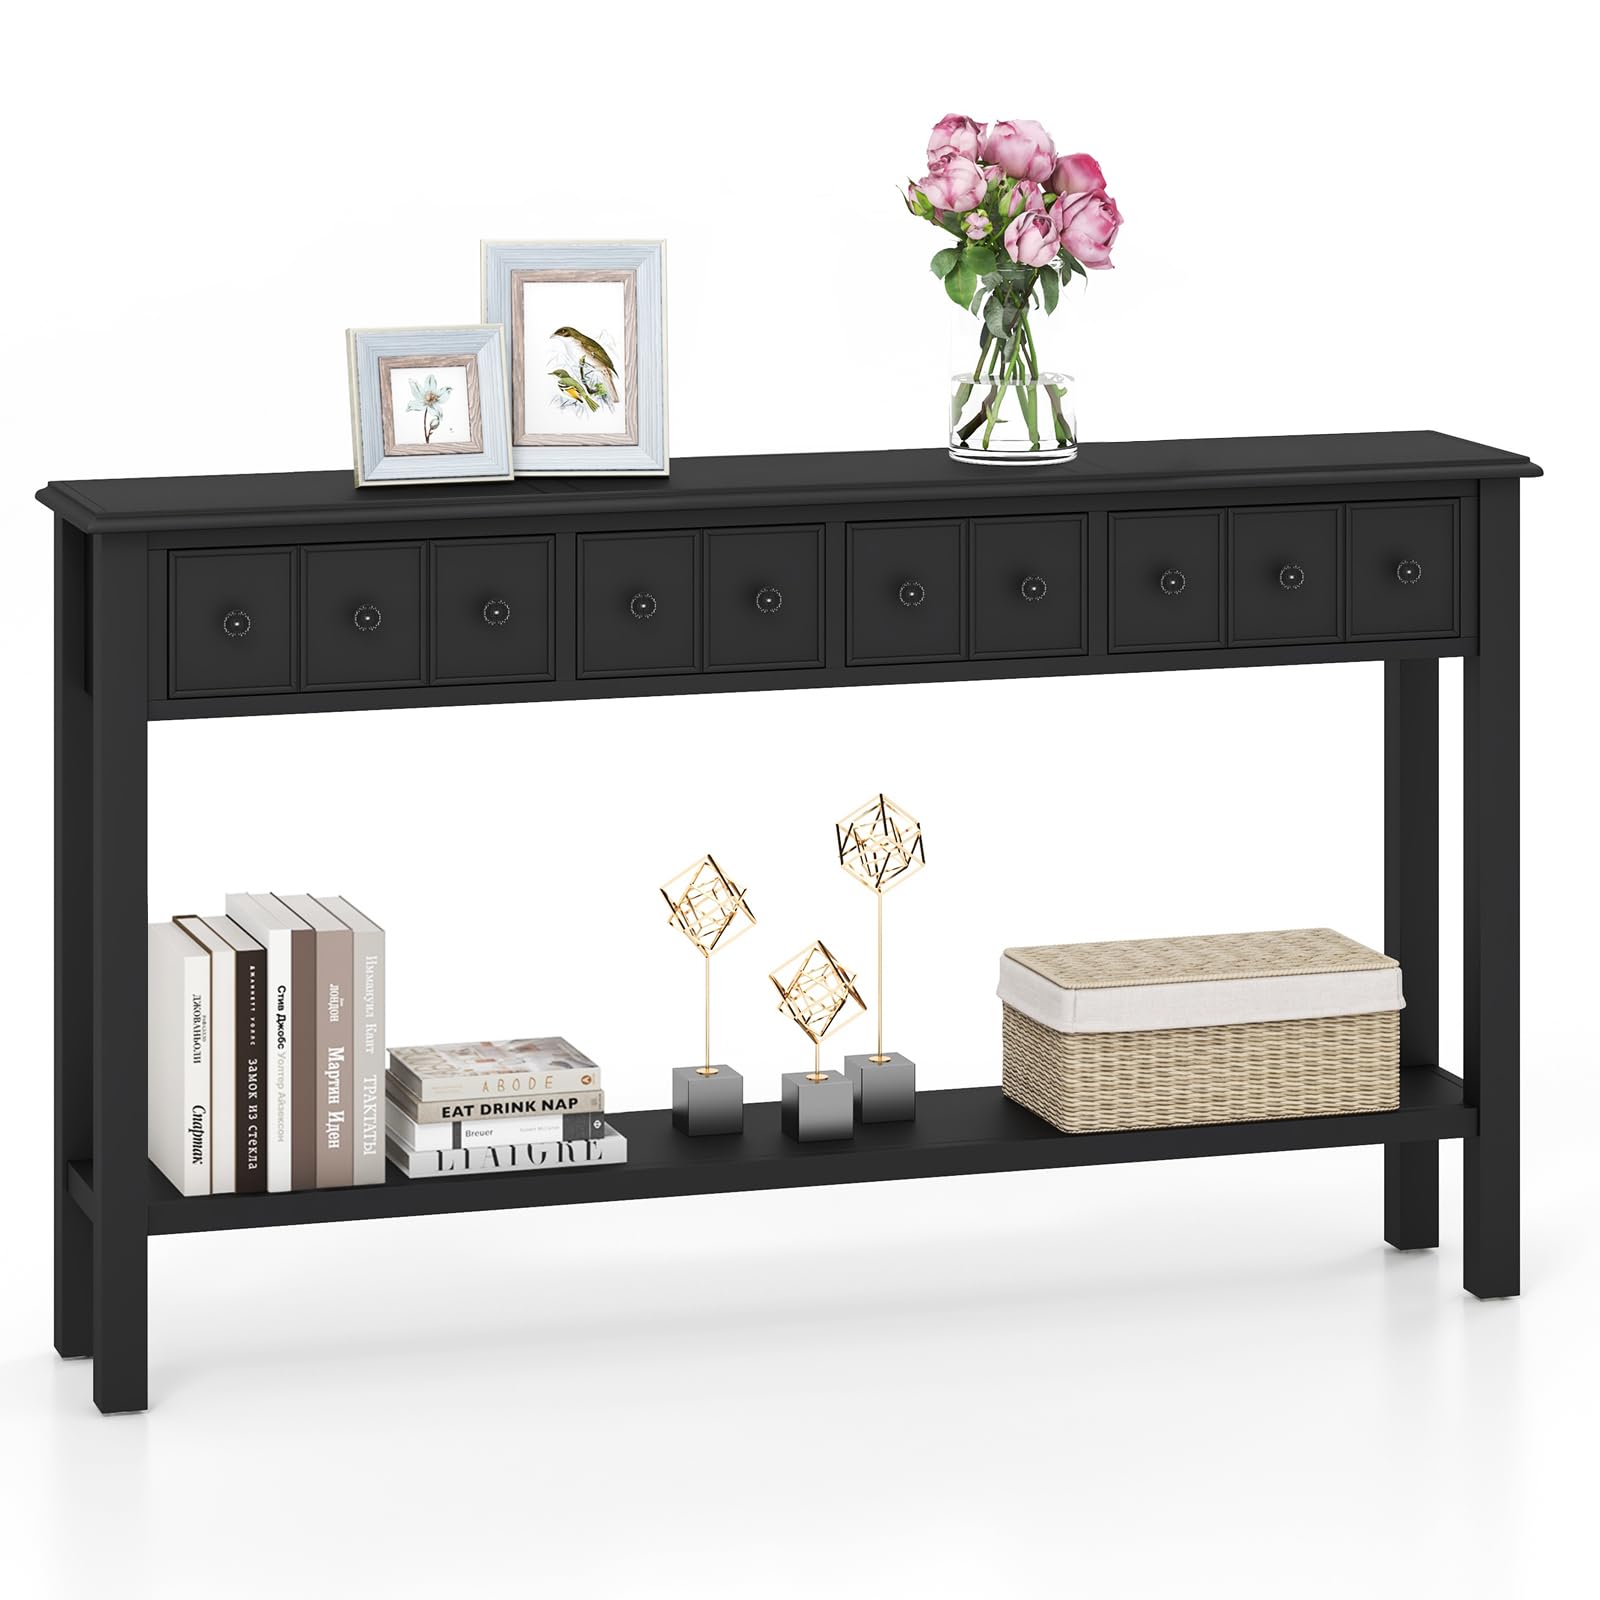 Giantex Narrow Console Table with Storage - 60" Long Sofa Side Table w/ 4 Drawers & Open Shelf, Espresso